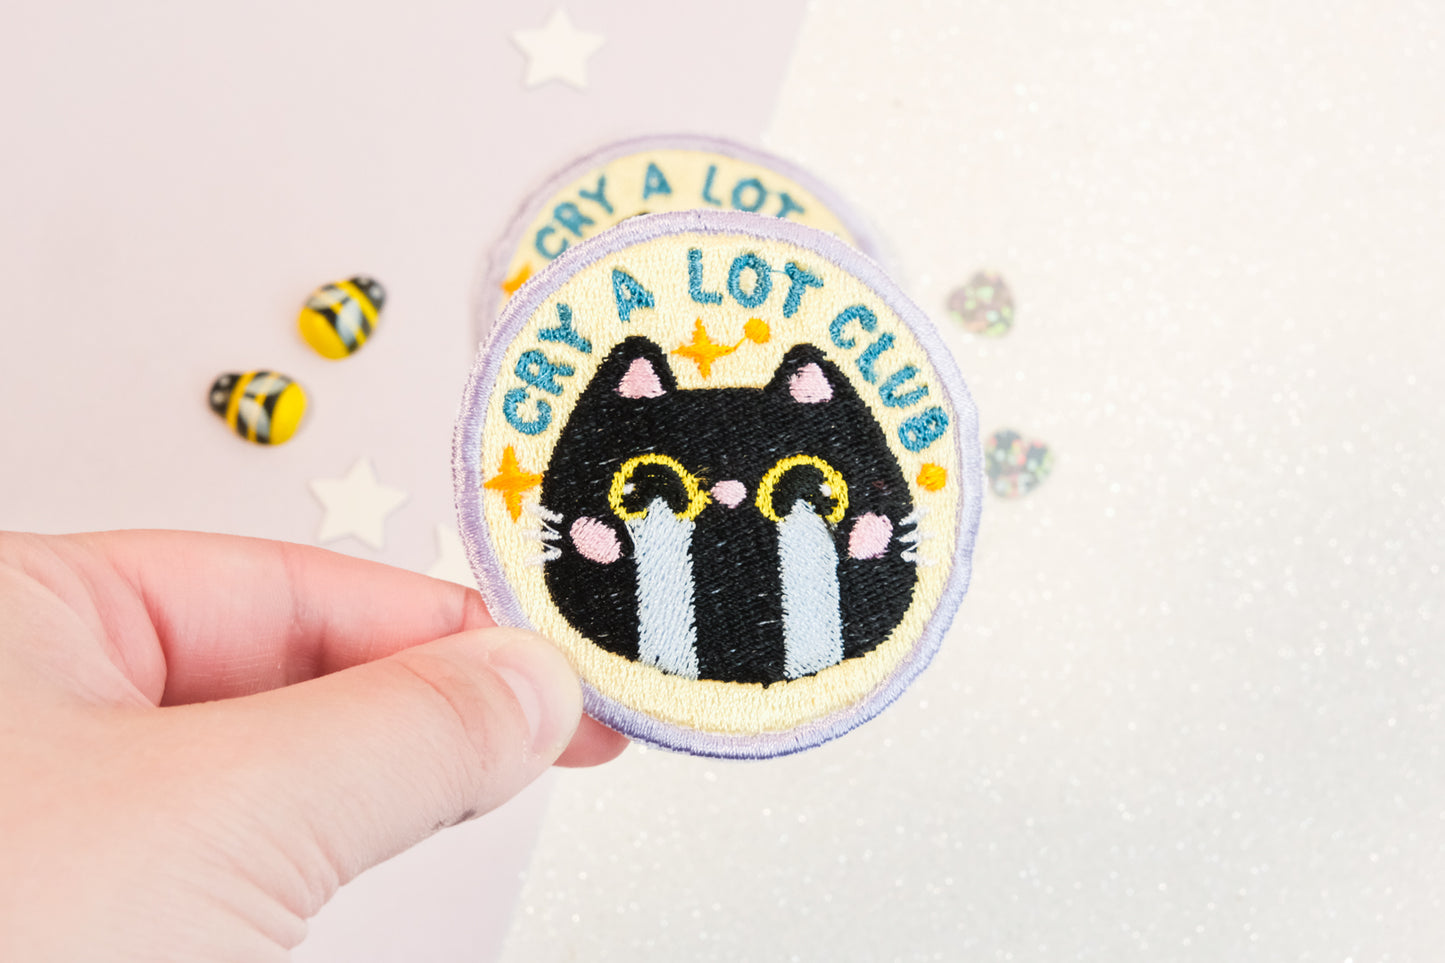 Cry a LOT Club Patch